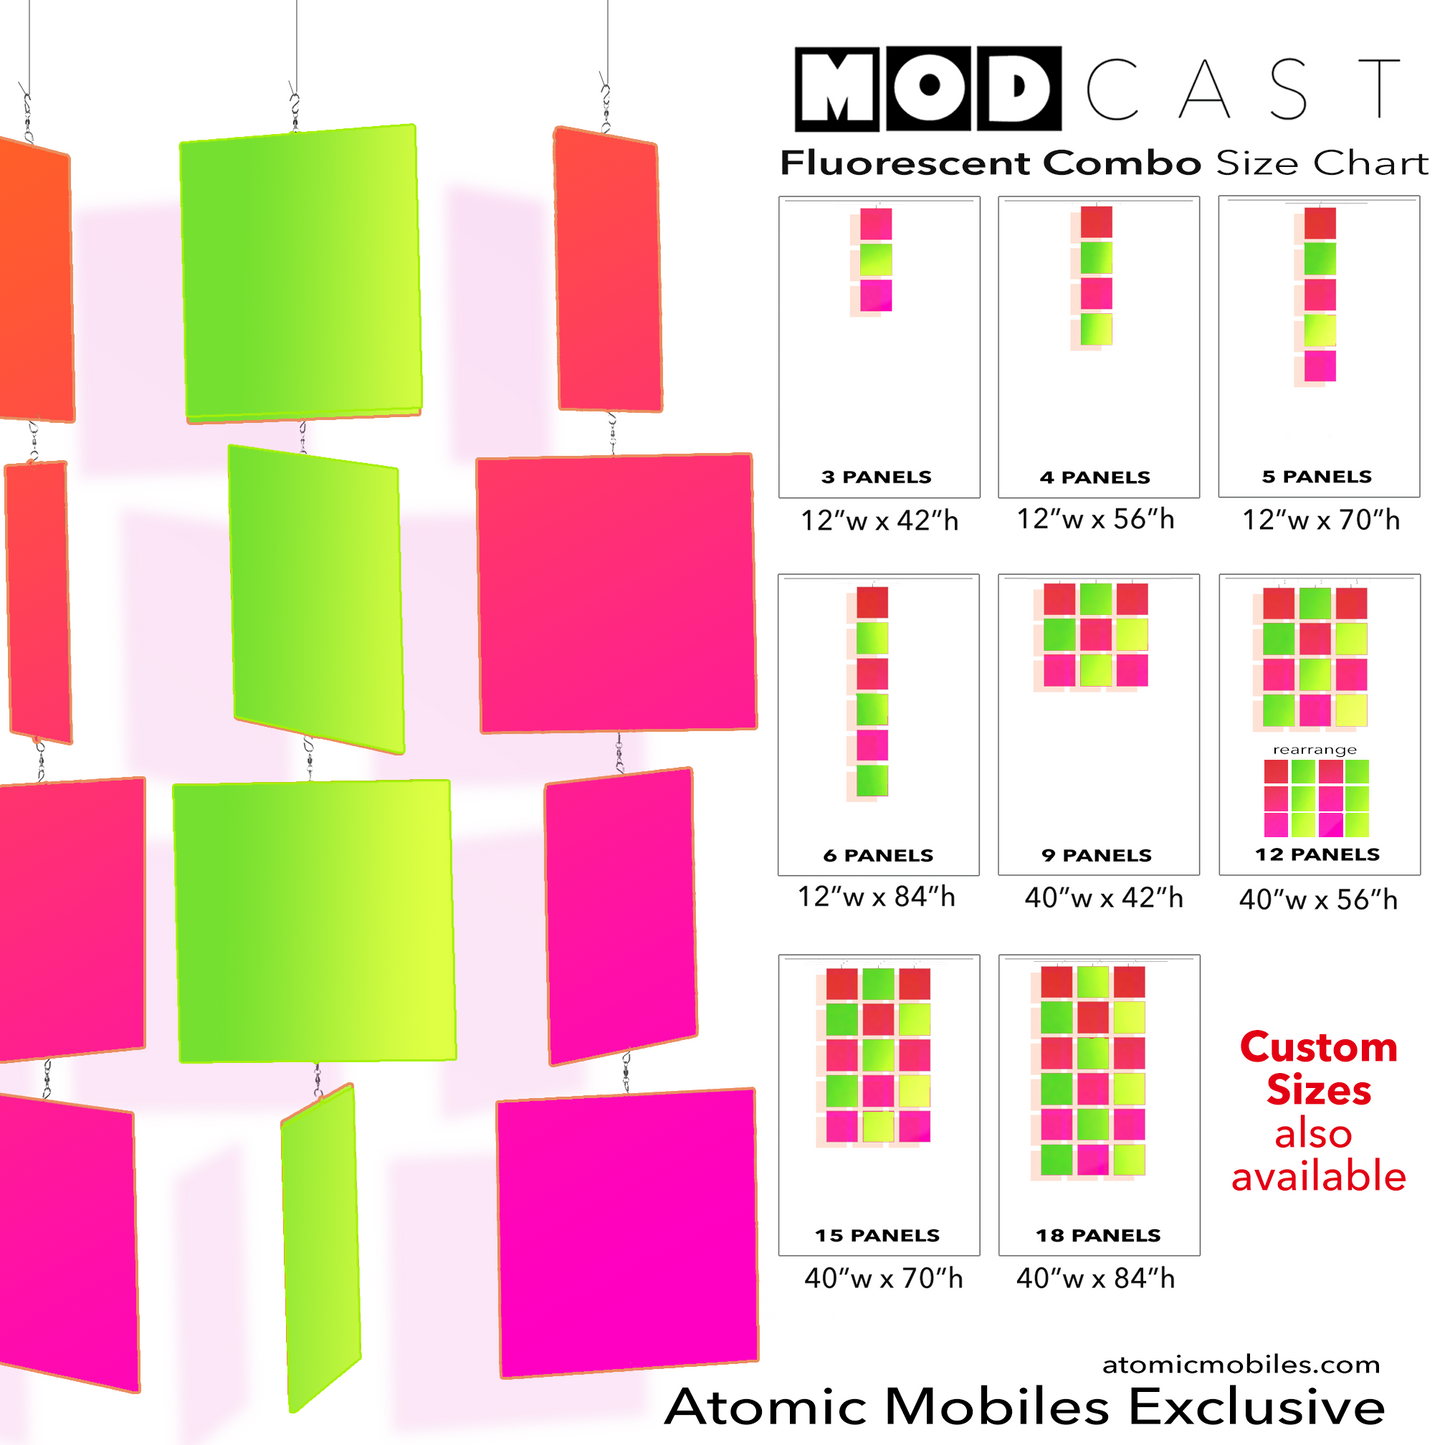 Fluorescent Combo in Hot Pink  and Lime Green MODcast mid century modern inspired hanging art mobiles by AtomicMobiles.com